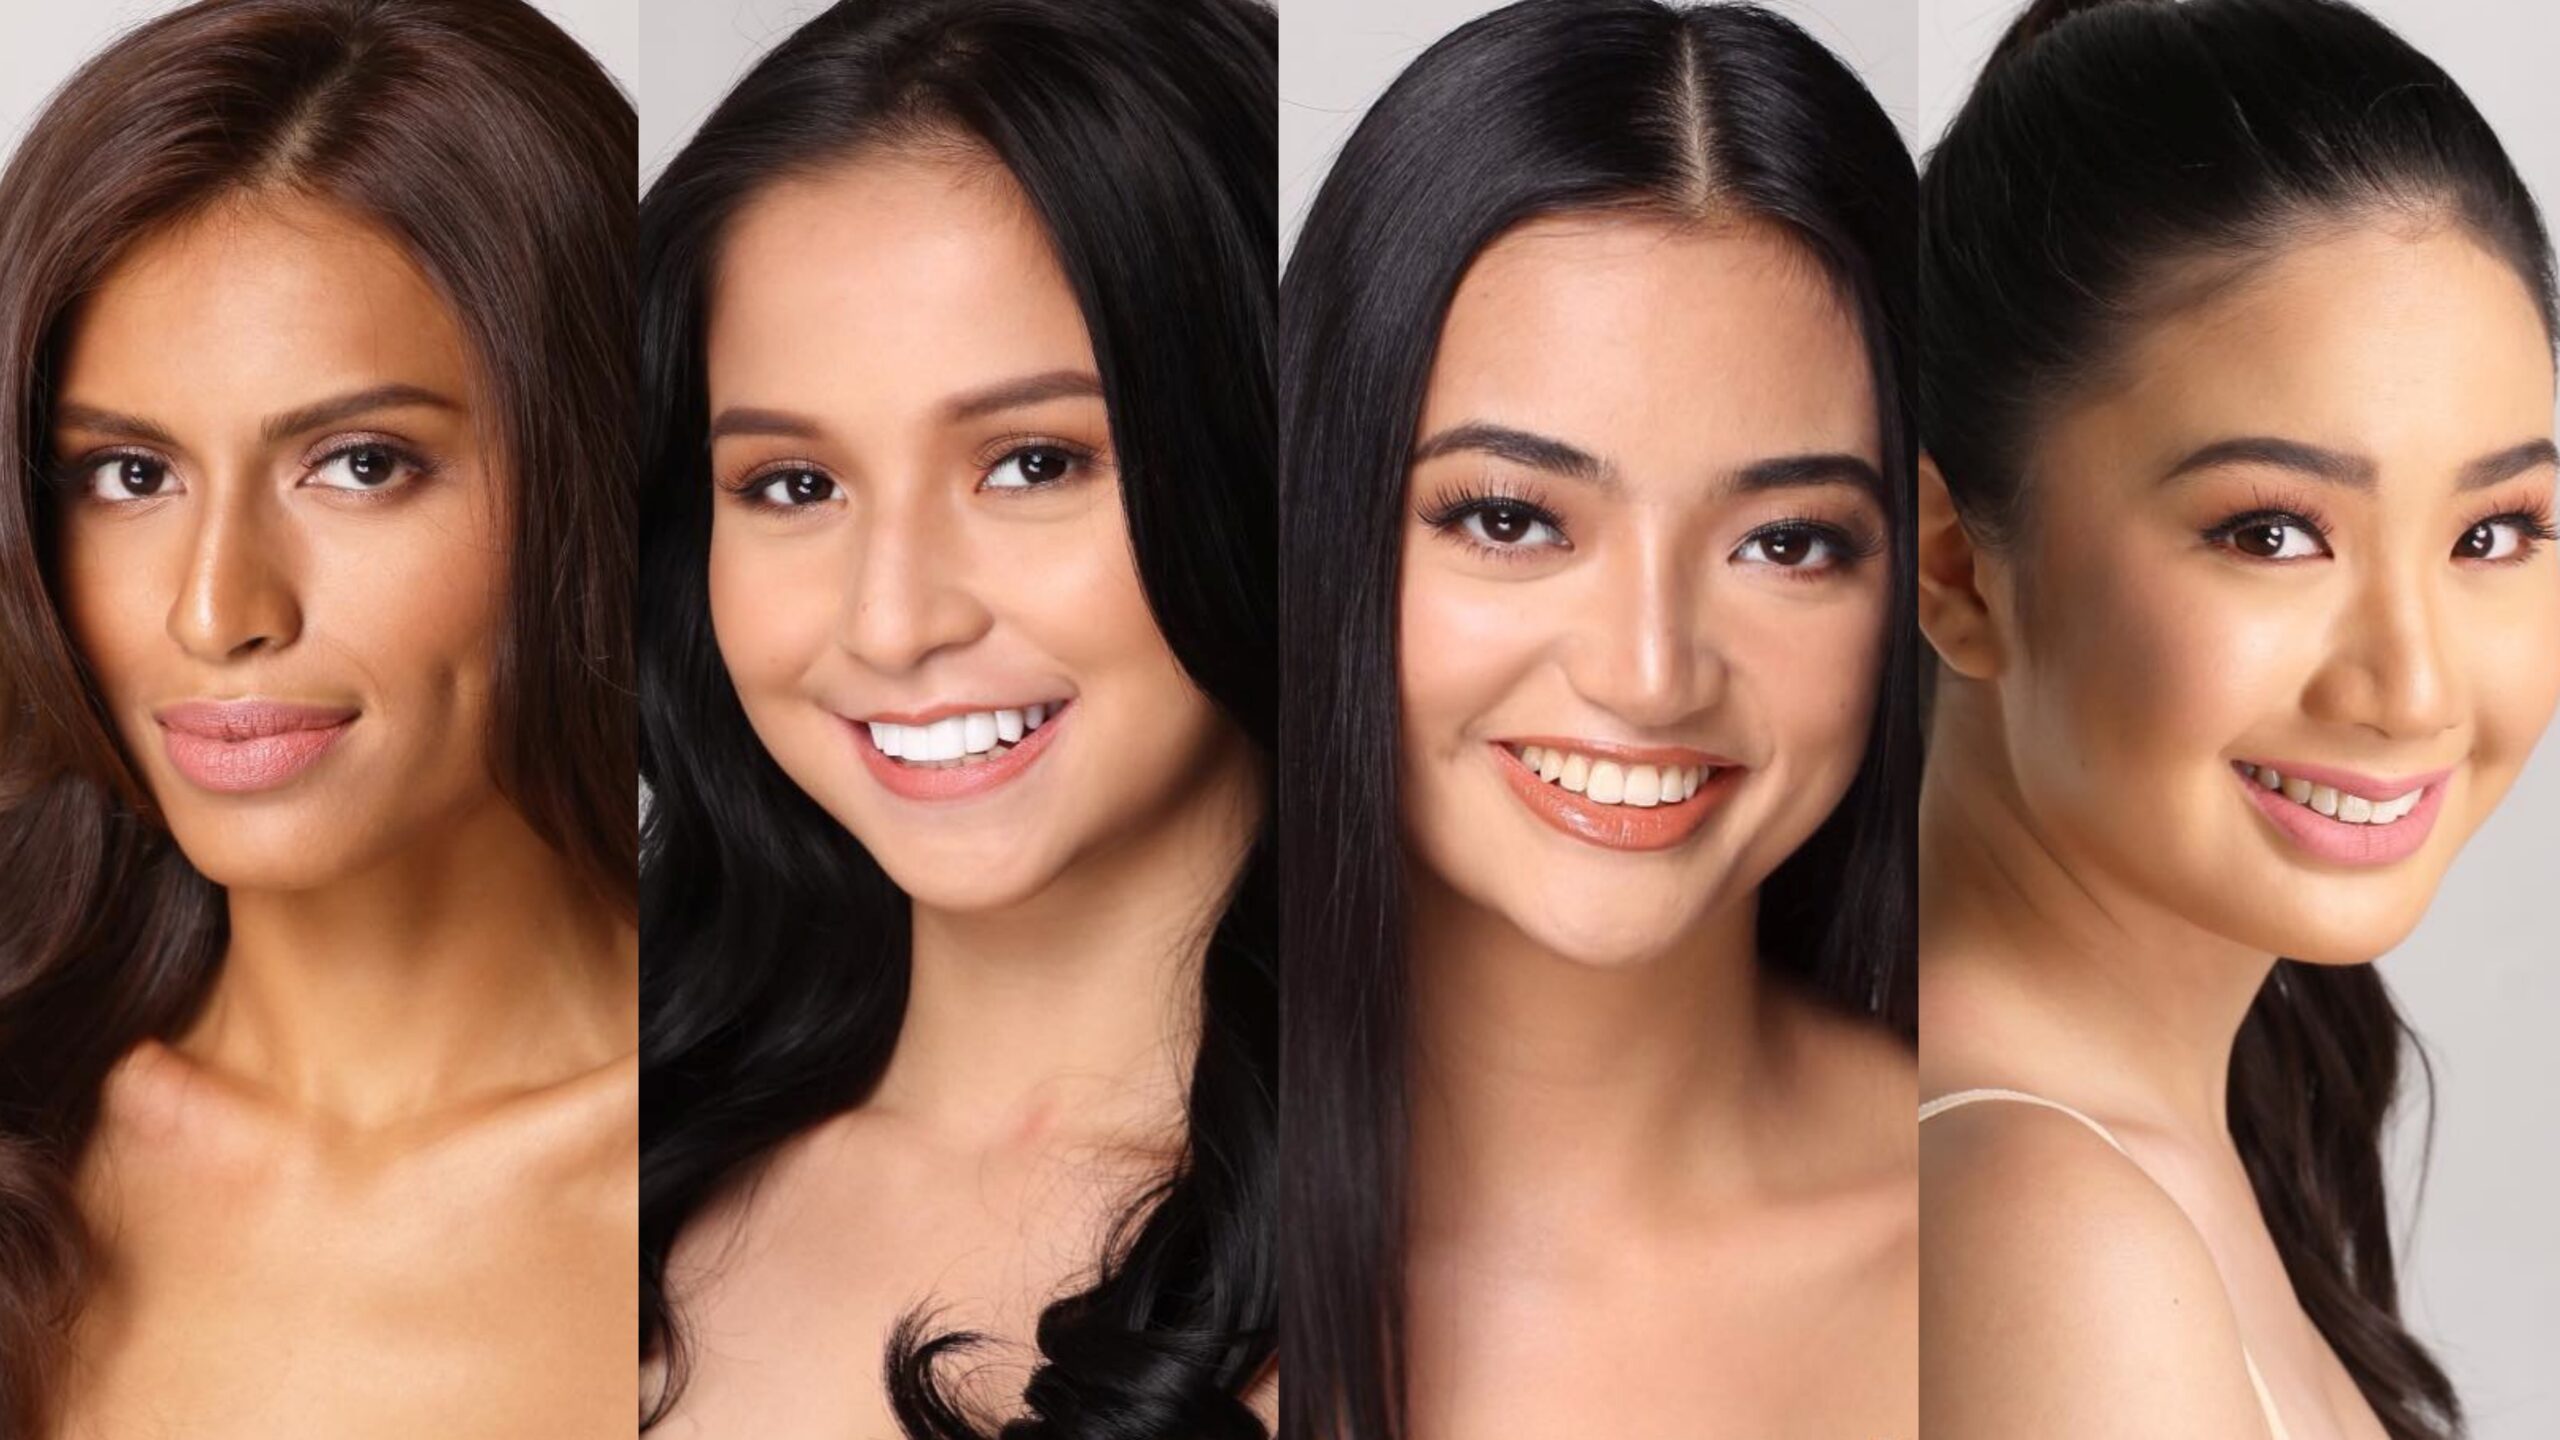 Meet the Miss World Philippines 2017 independent candidates